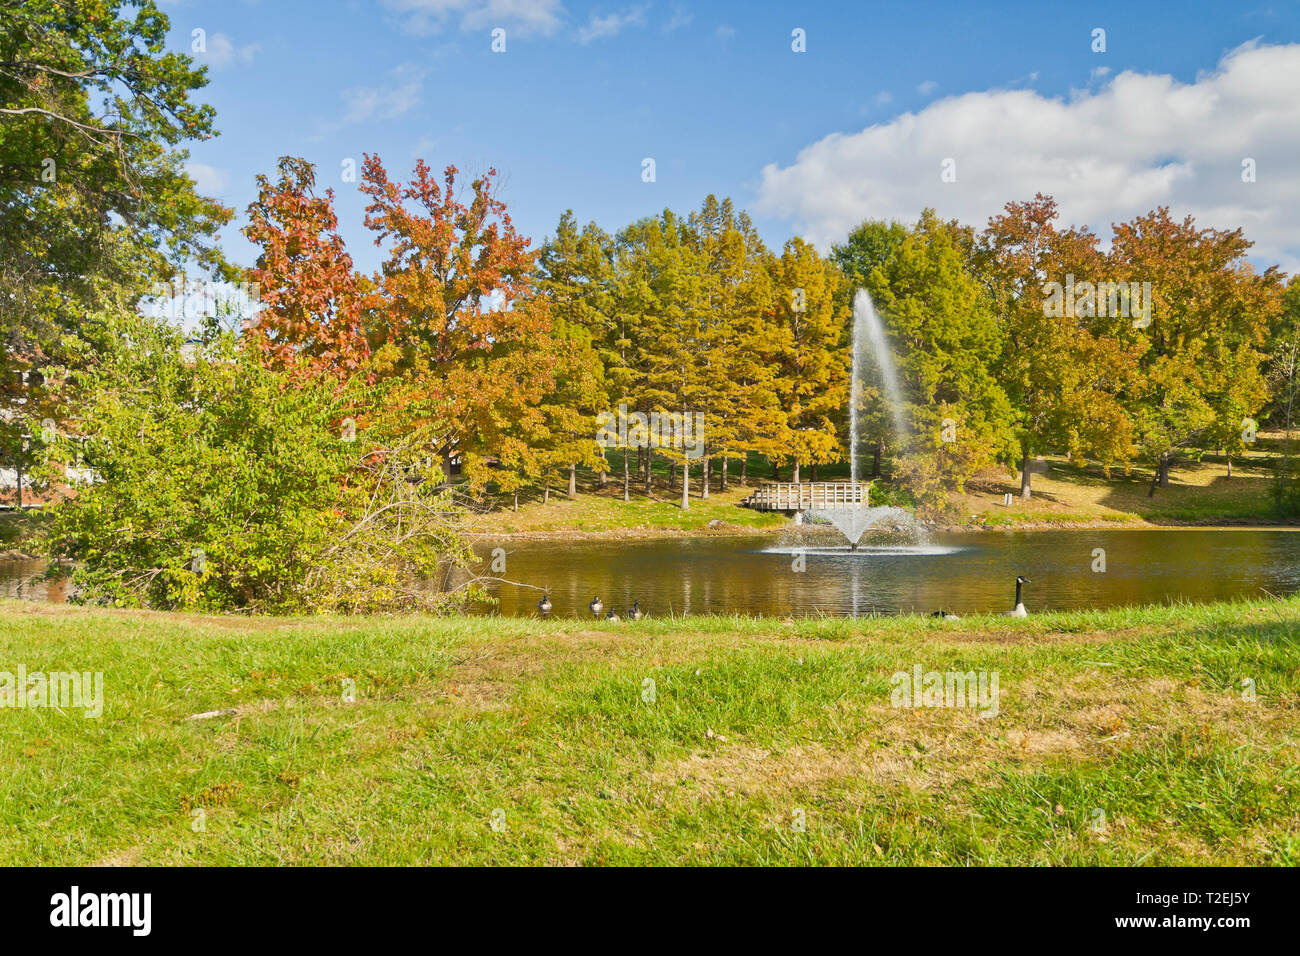 Blue sky with a few clouds, fall colors among green foliage, a fountain, and geese on an autumn afternoon by Bugg Lake on the UMSL campus. Stock Photo